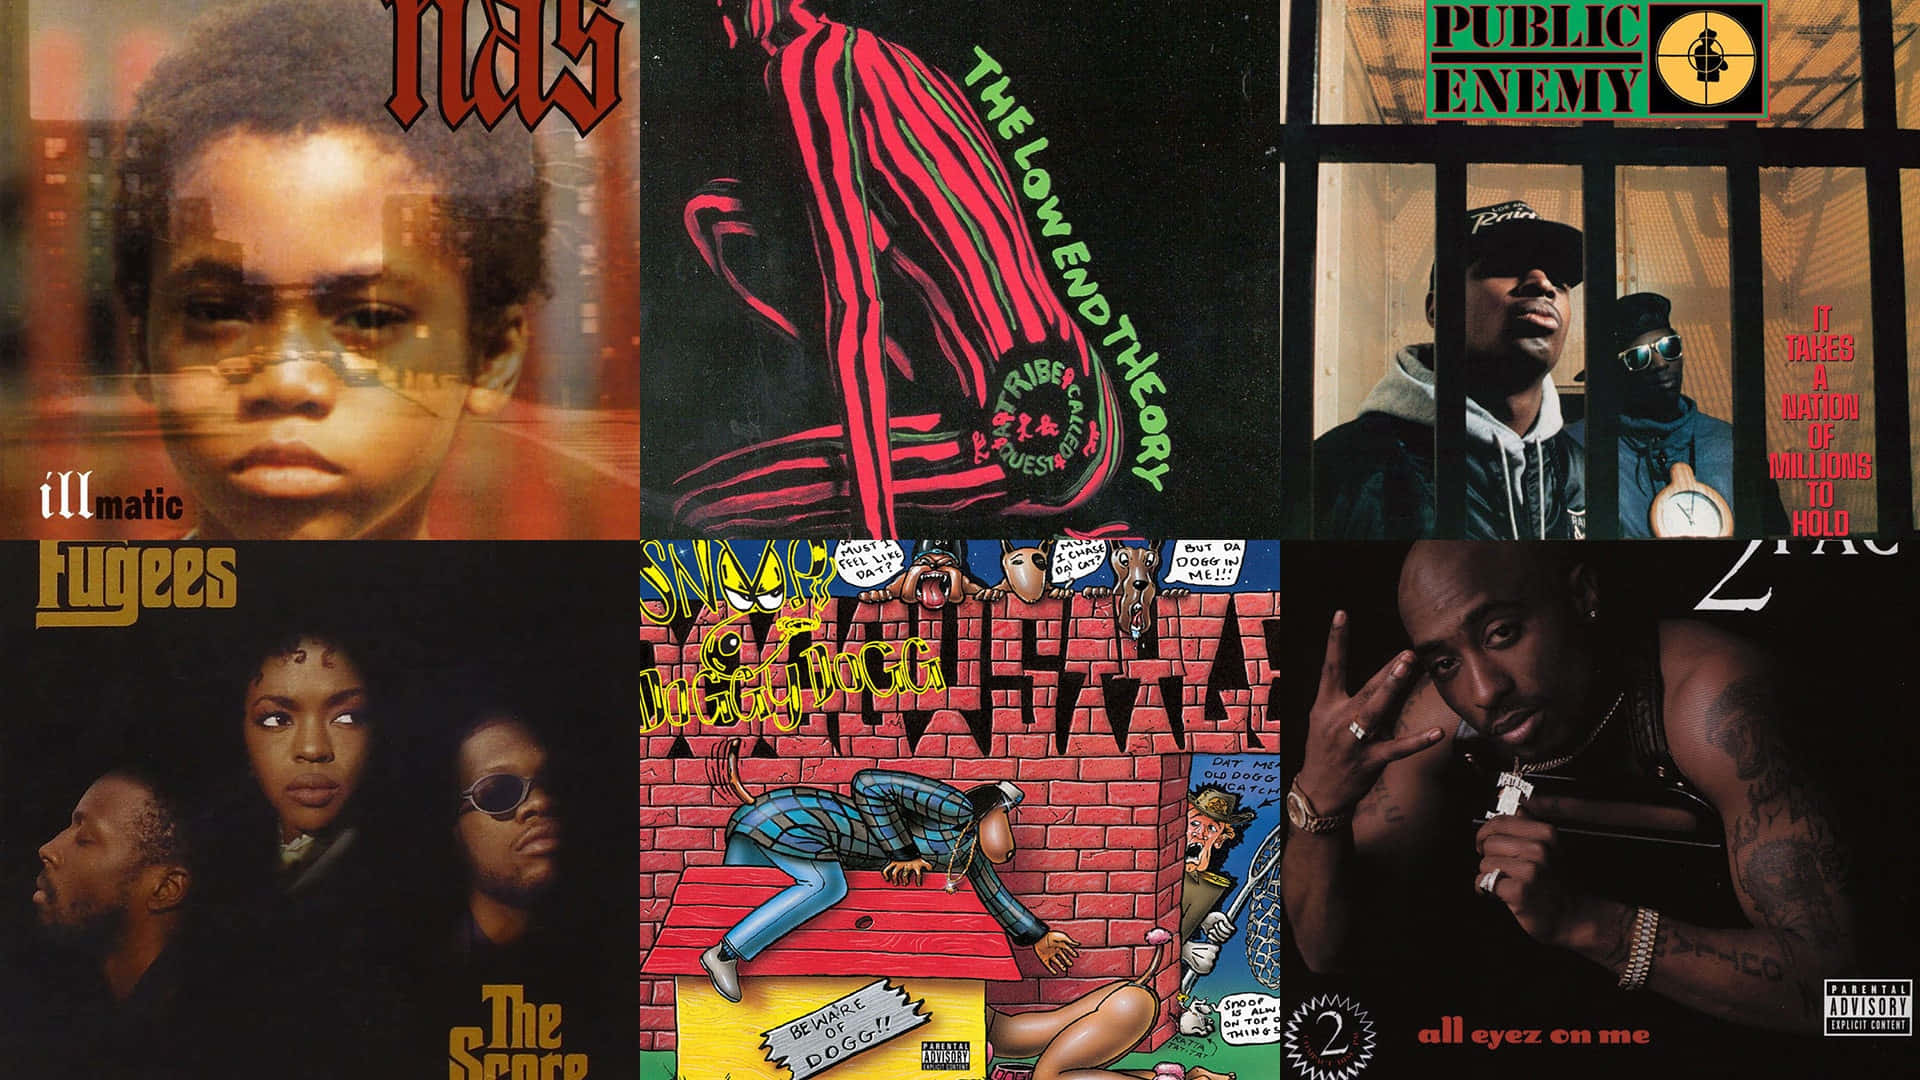 The Best Hip Hop Albums Of All Time